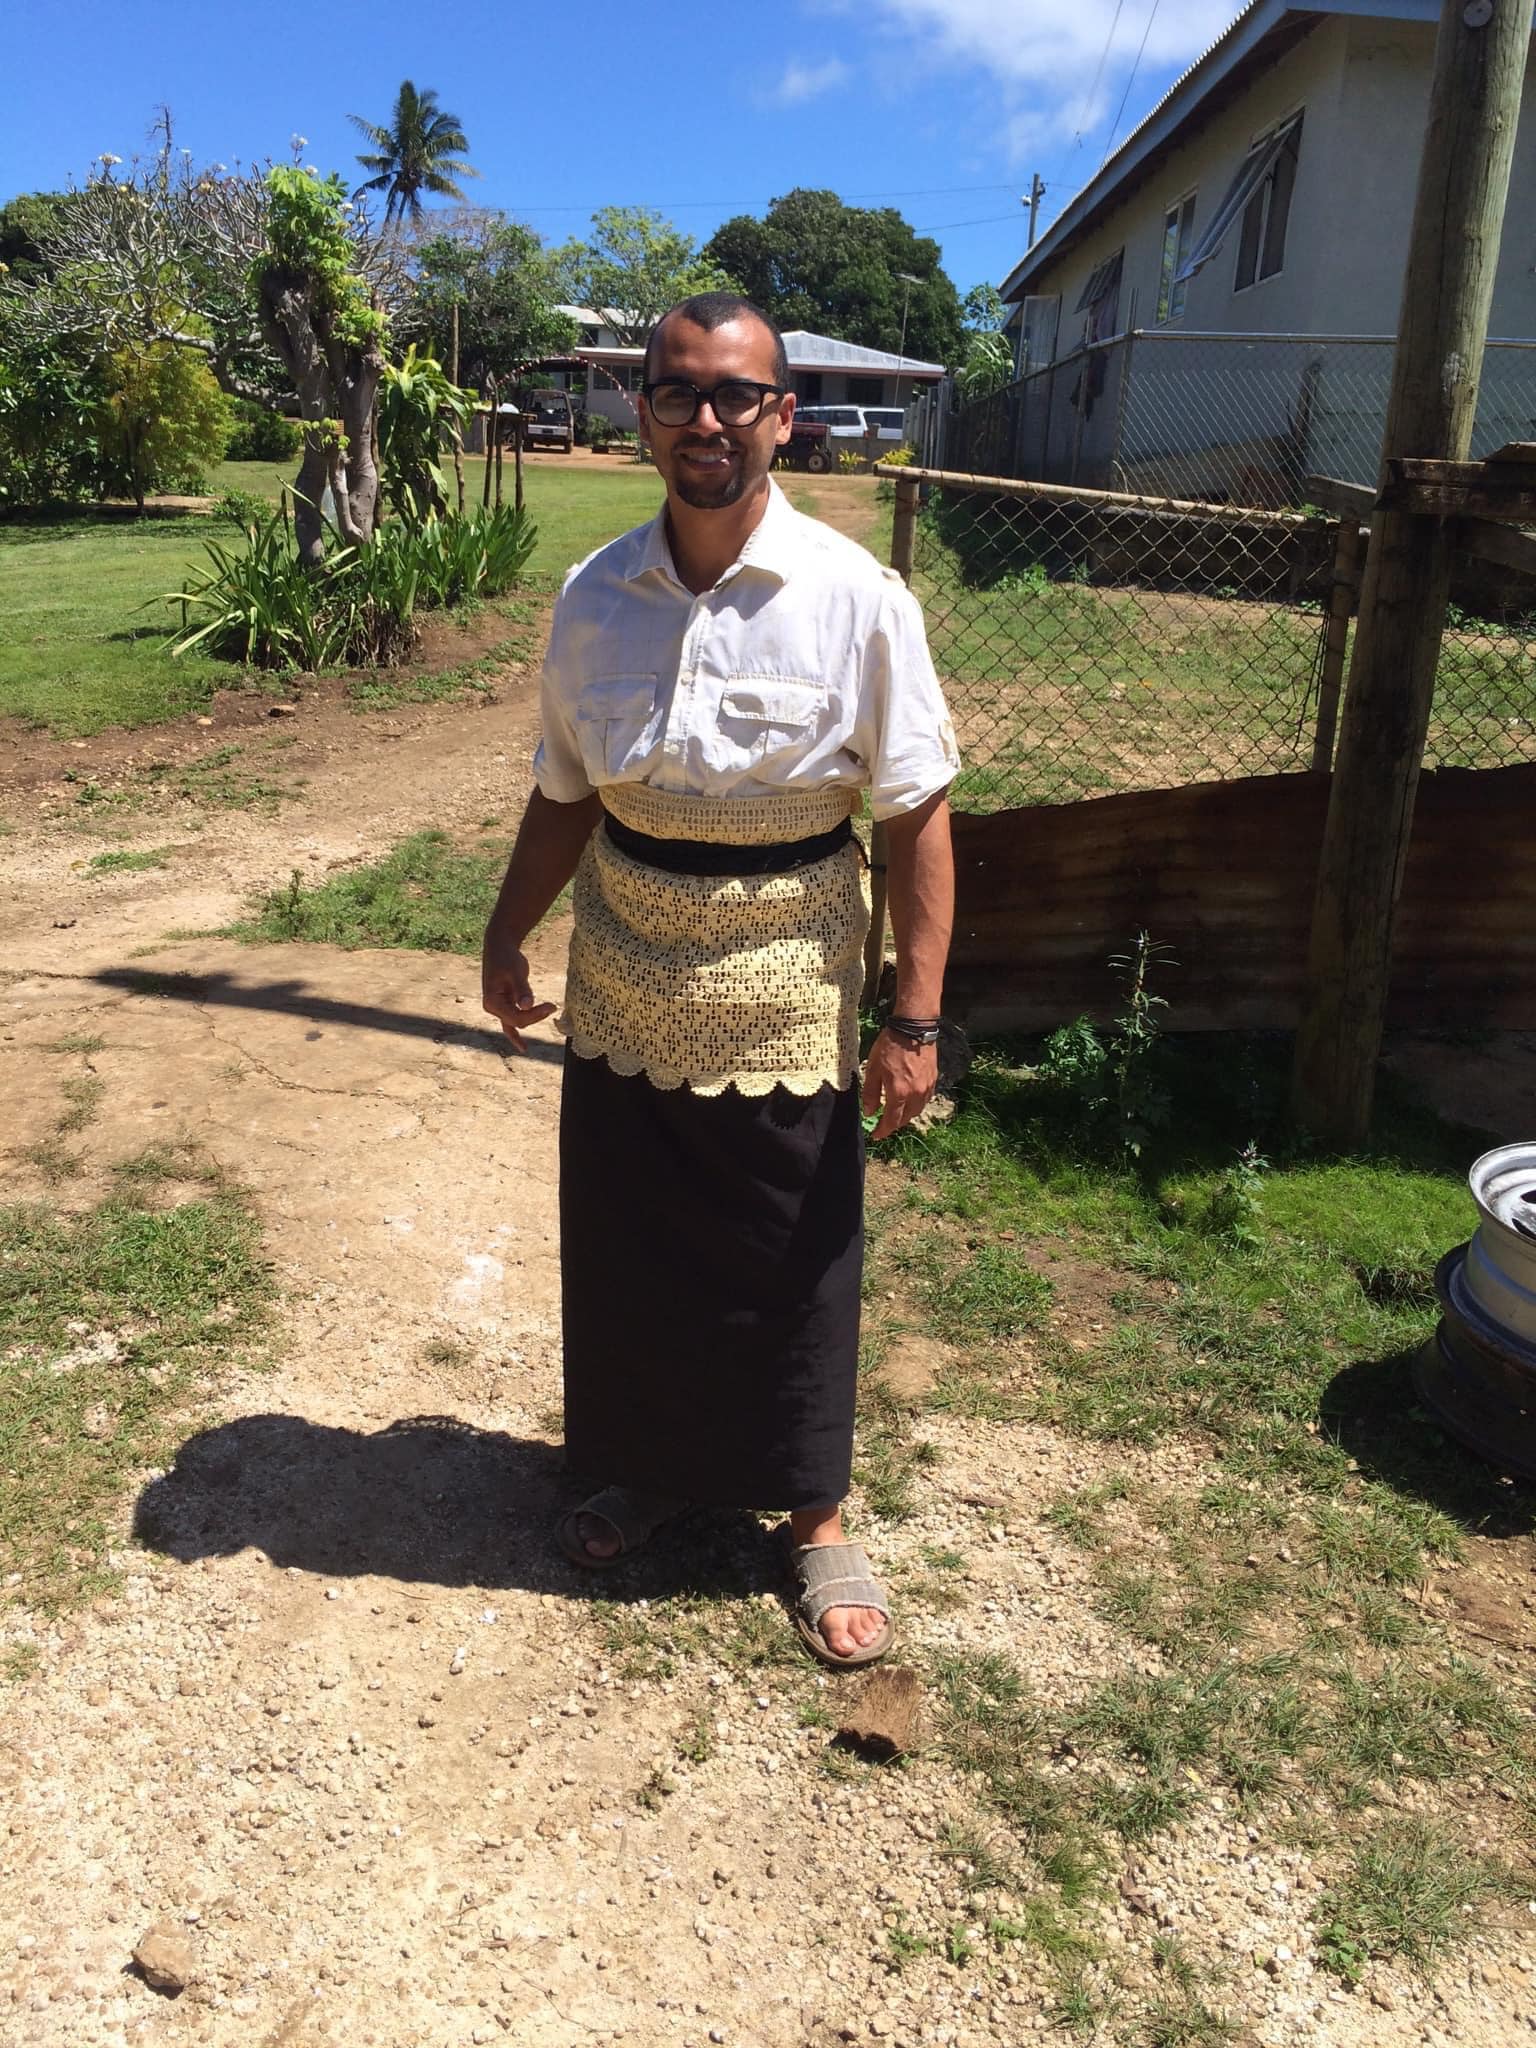 A person wearing traditional Tongan attire, consisting of a tupenu (a woven skirt) and a ta'ovala (a waist mat made from woven pandanus leaves). The person is standing in a picturesque setting in Vava'u, Tonga, representing the rich cultural heritage of the Pacific Islands